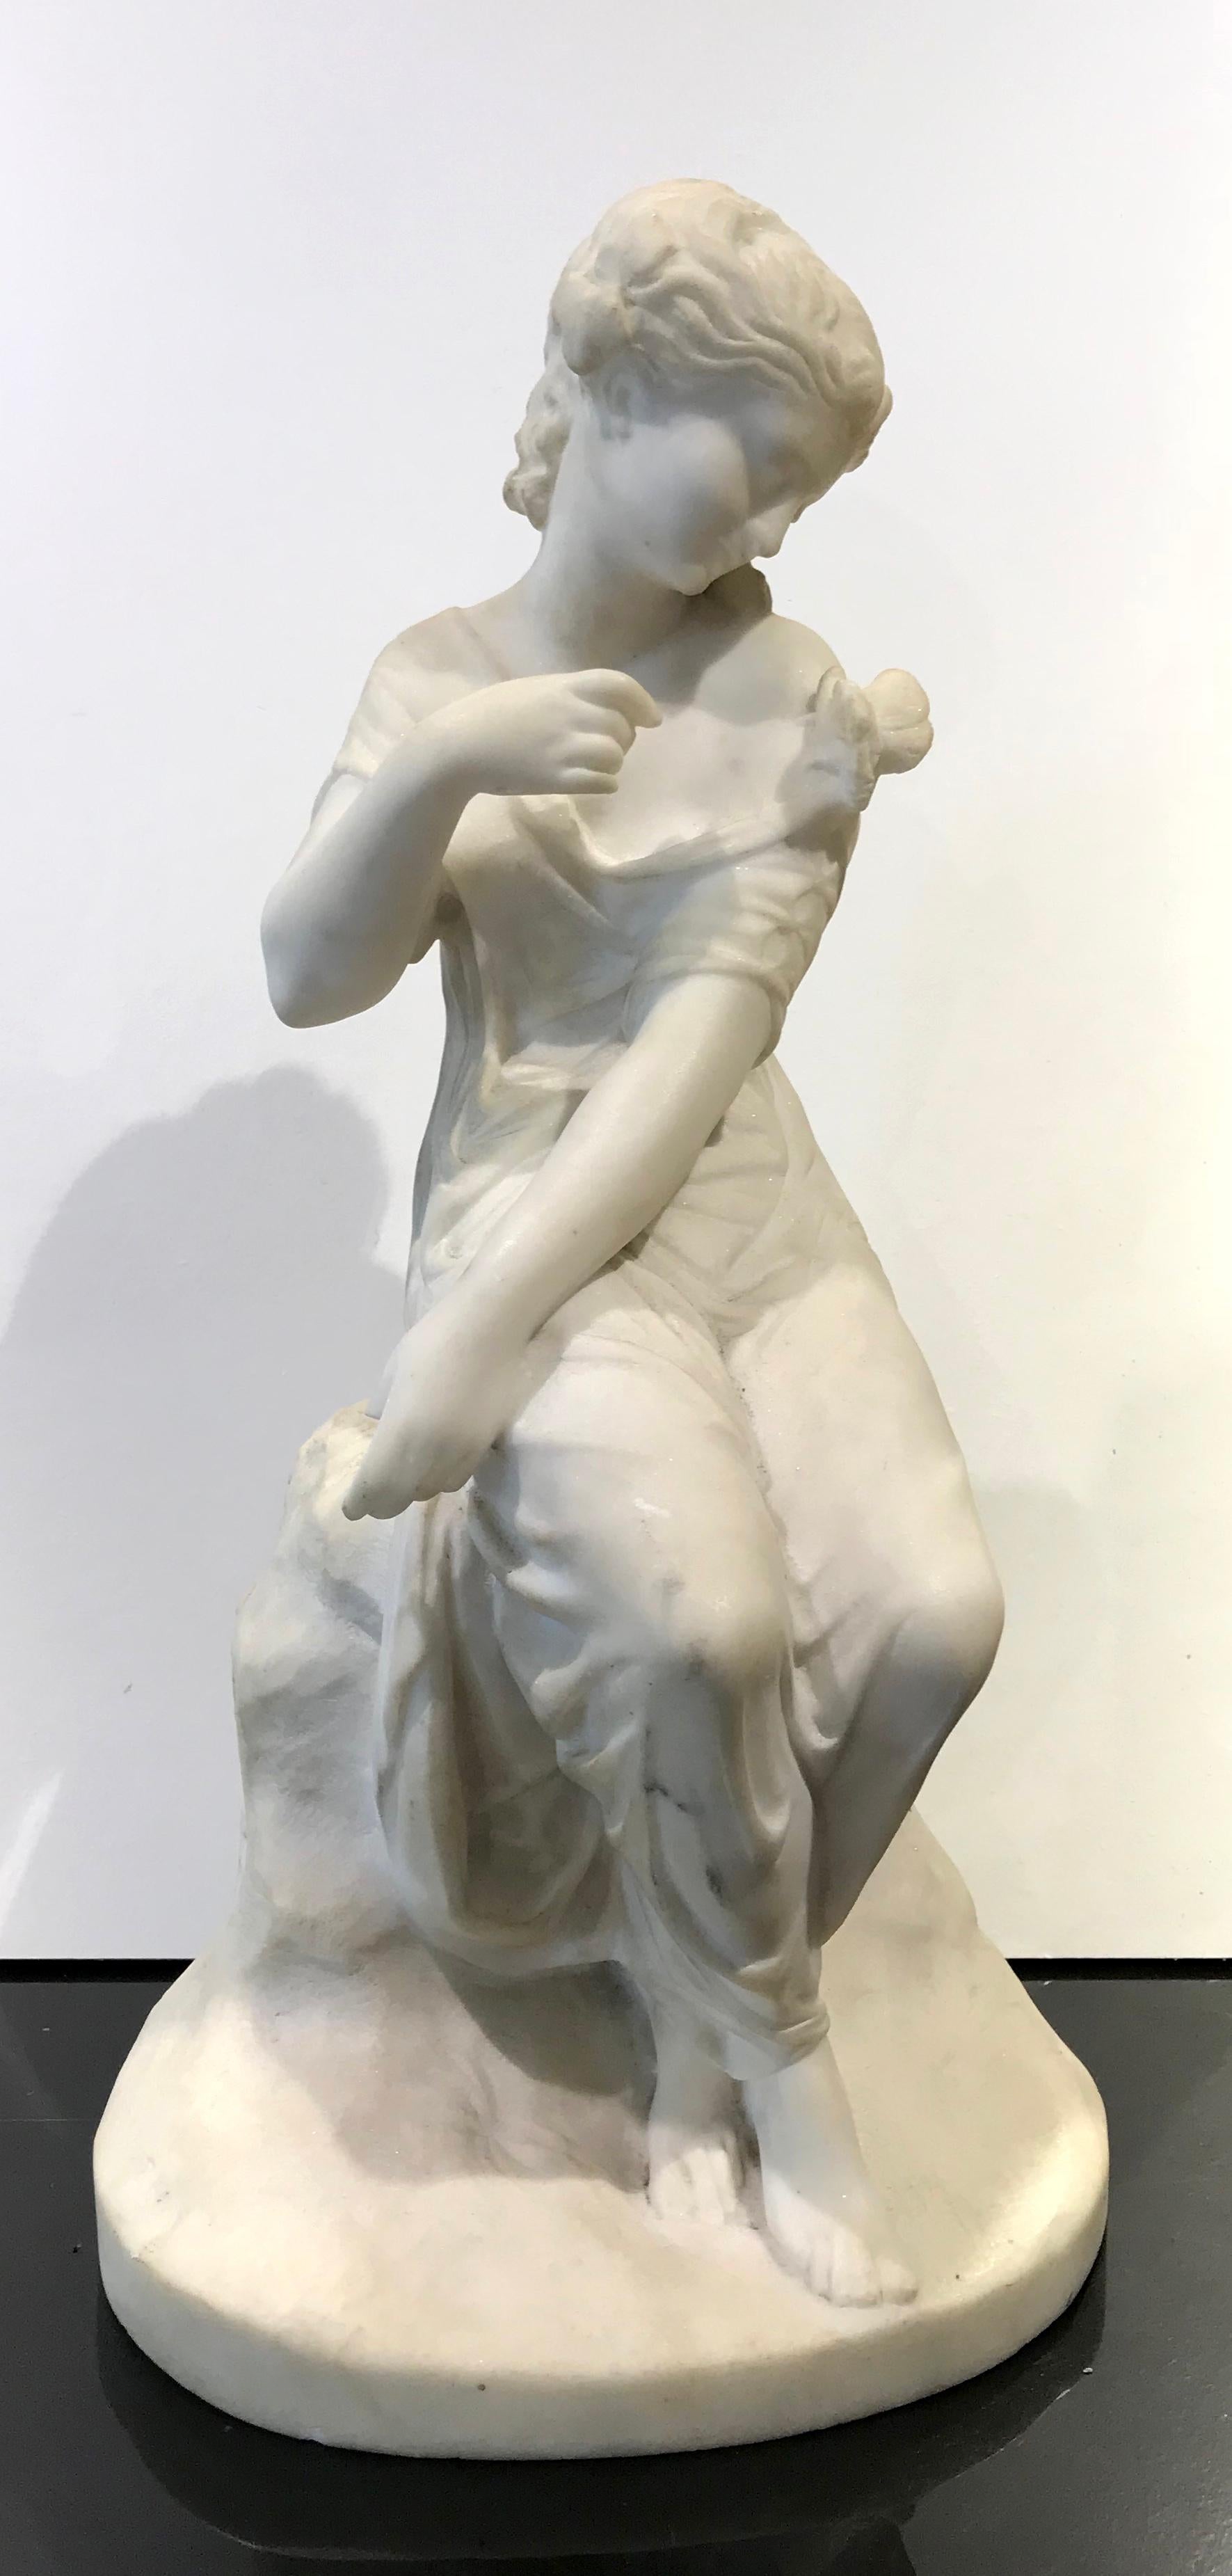 The work of the artist are exposed in the most important city and museum in Paris for example at the Louvre museum, at the Opera, and in many other important sight.
James Pradier was born in Geneva then he left for Paris in 1807 to work with his